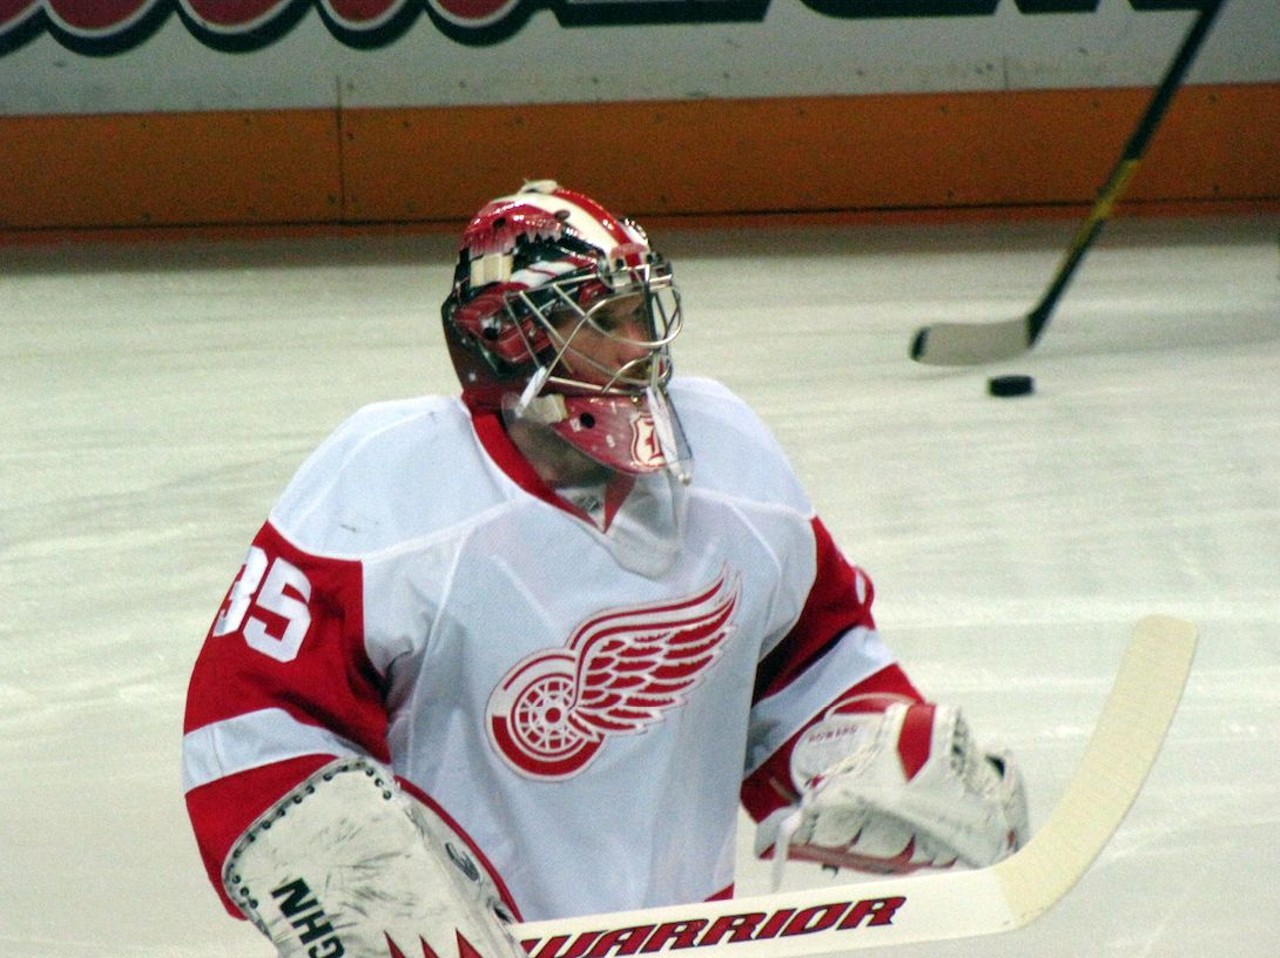 Jimmy Howard | Goalie DILF 
When he&#146;s not stopping pucks, the Detroit Red Wings&#146; goalie is stopping hearts. As the goalie for the Red Wings and an all-around NHL All-Star, Jimmy knows what it takes to save the day. He was voted Rookie of the Year in 2010, and one year later his first son was born. He frequently brings his three boys to his hockey games. 
Photo via  Dinur / Flickr Creative Commons 